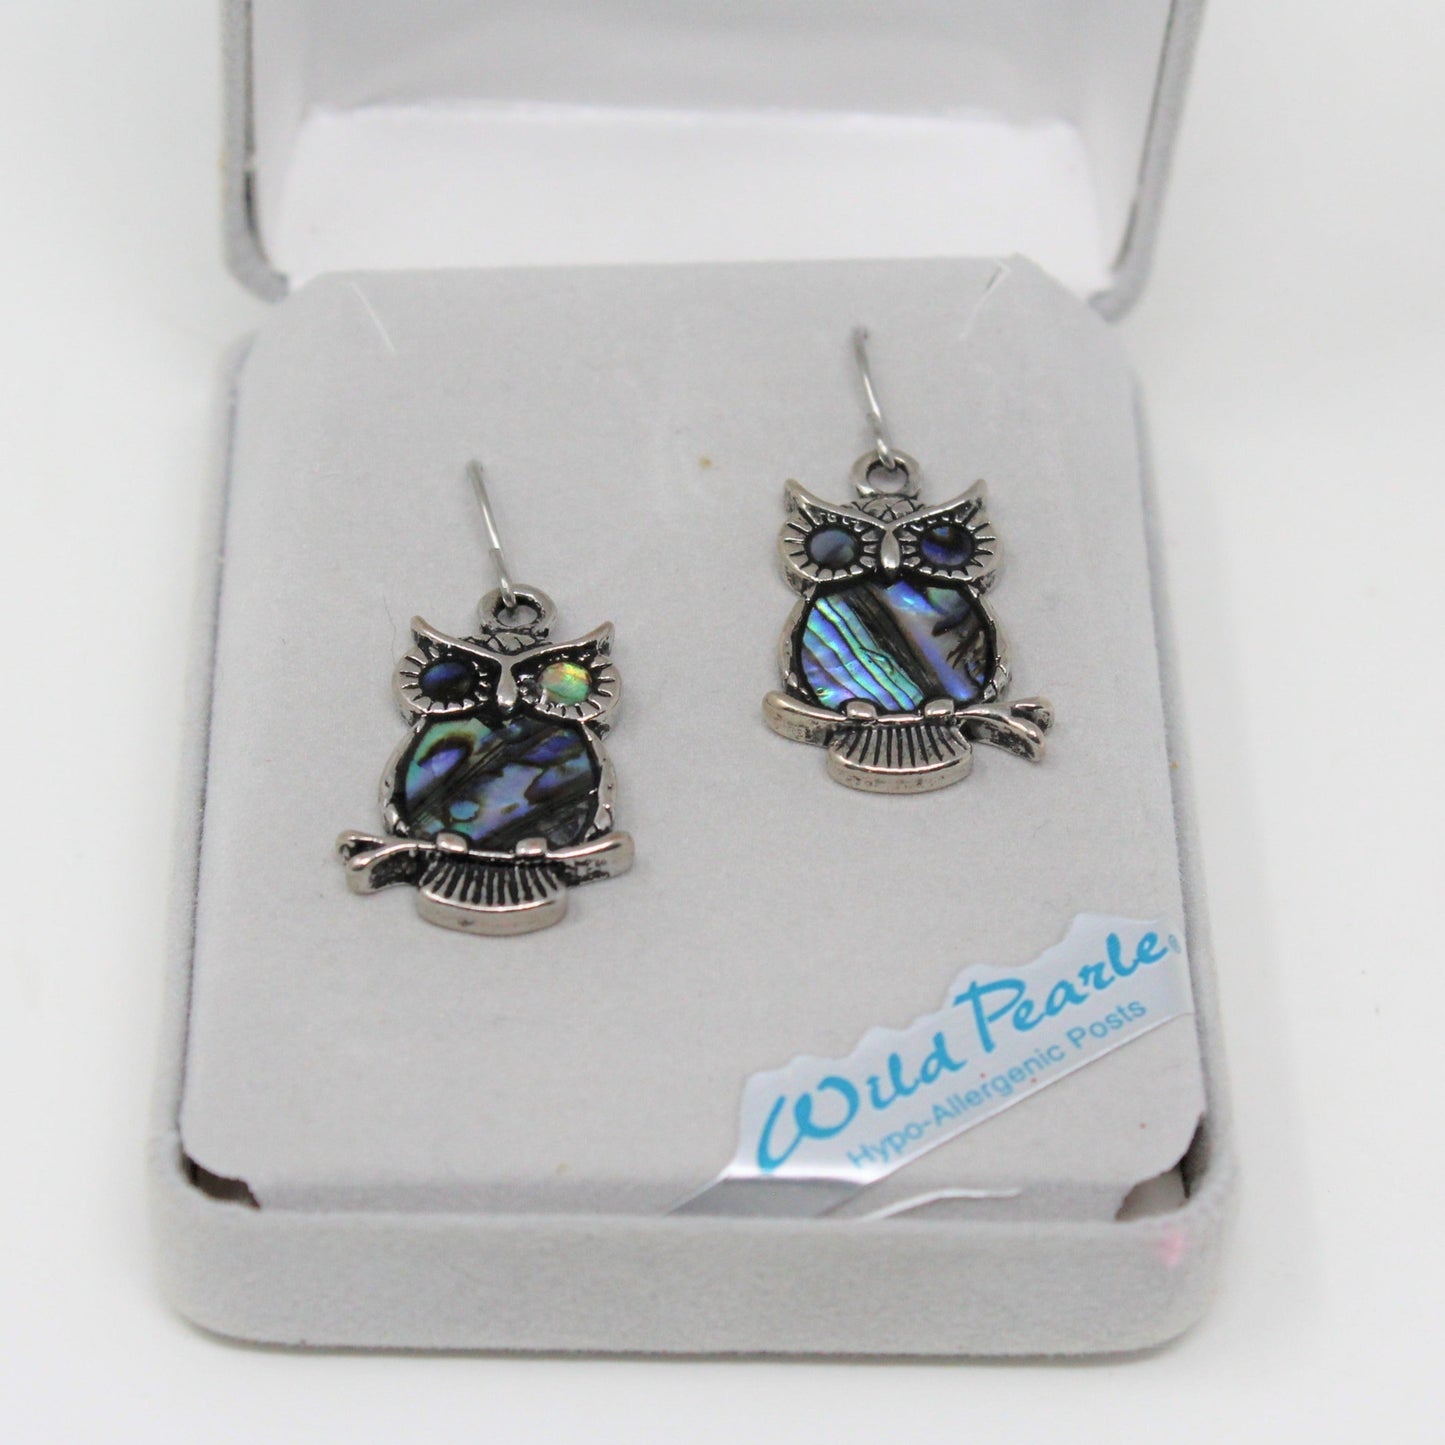 Earrings, Storrs Wild Pearle, Owl Shaped Abalone / Silverplated, Pierced